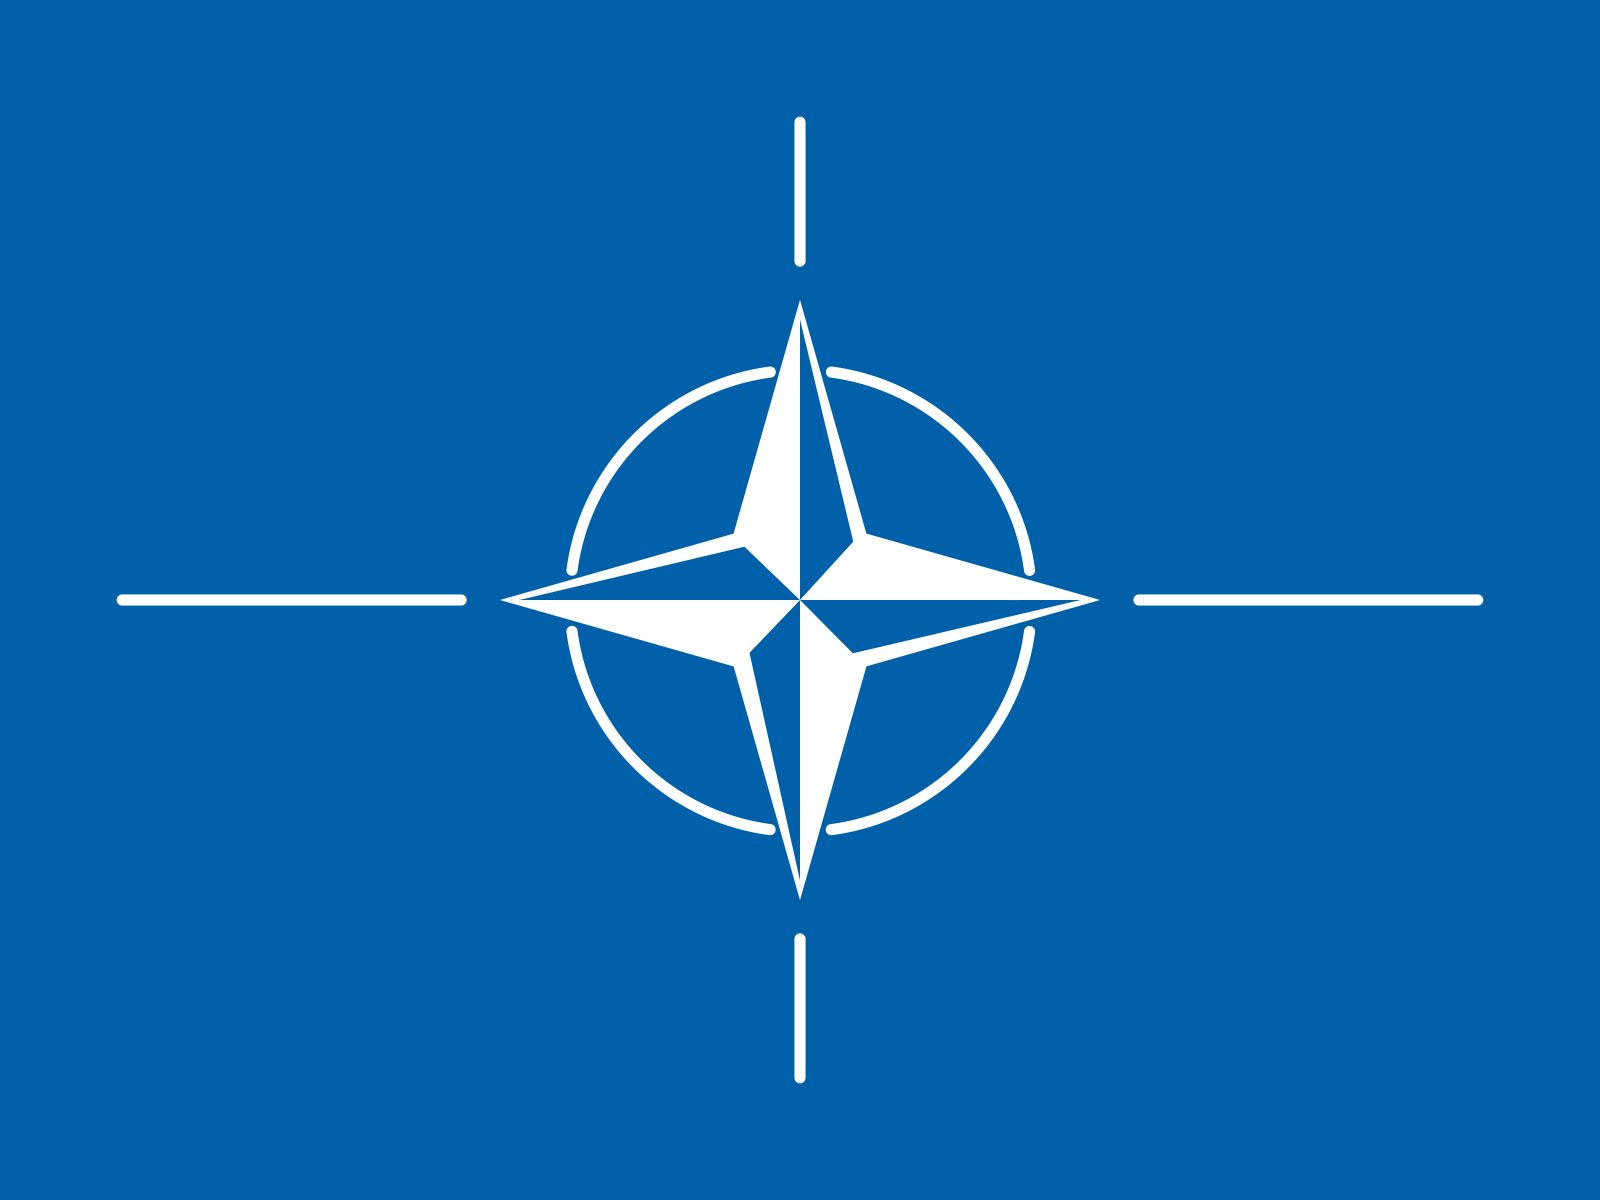 NATO stepping up support for Ukraine